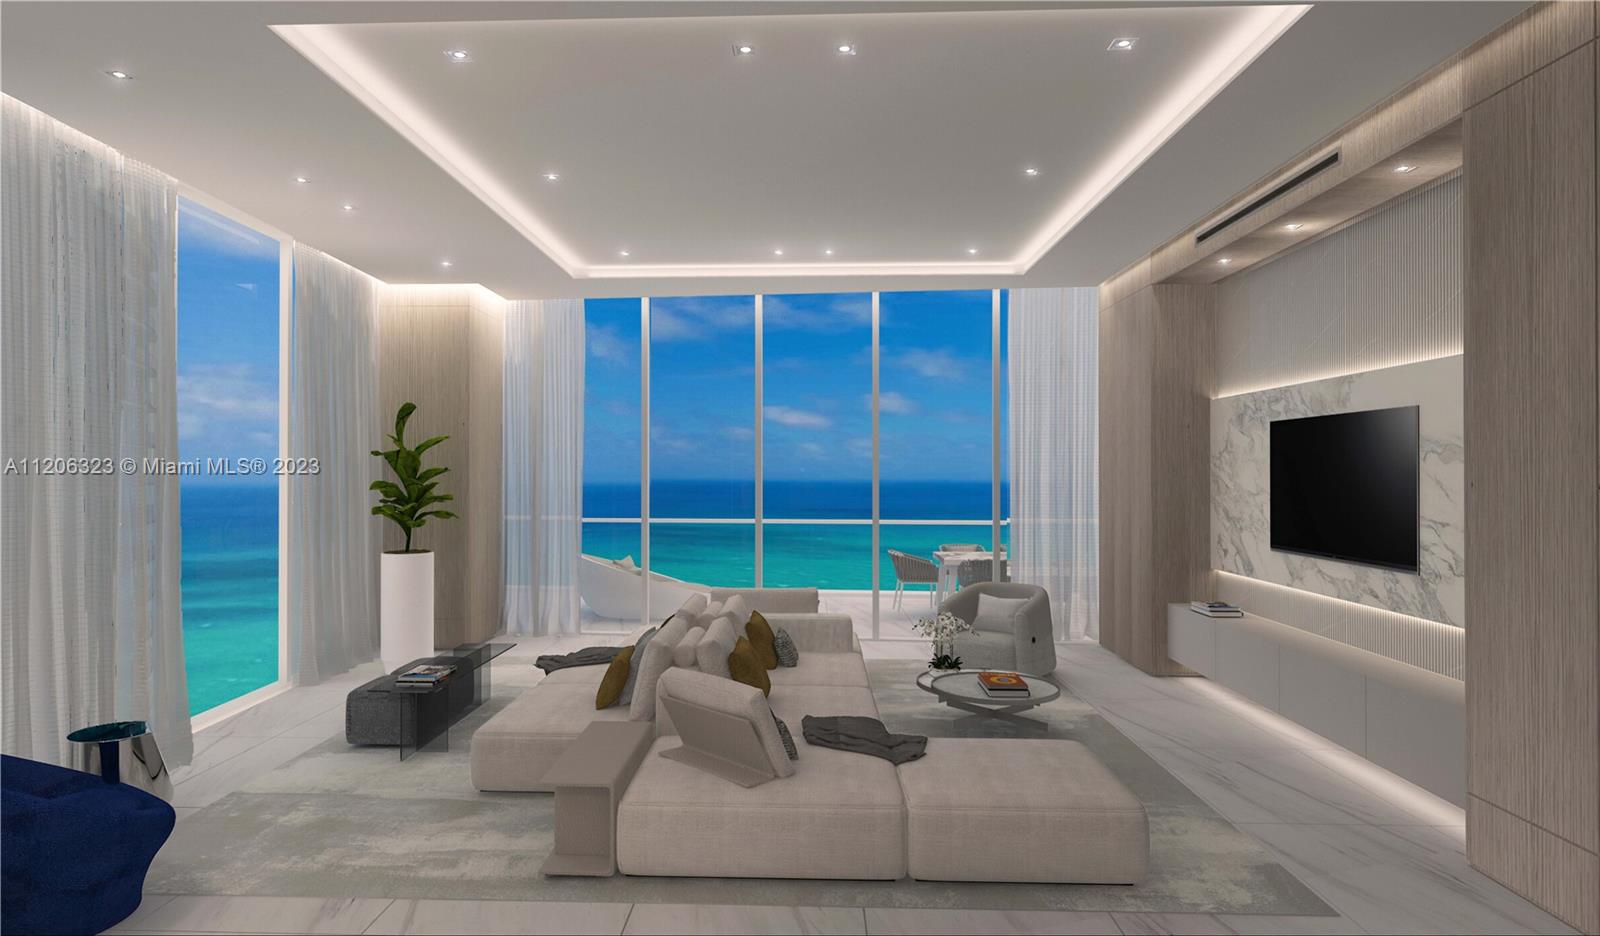 Vacant BRAND NEW TURNBERRY OCEAN CLUB (Home to the 1%) Decorator Ready beachfront corner unit with amazing views, 1 of a kind 5 bed & 5 1/2 baths with 12 ft ceiling heights, kitchen has top-of-the-line Gaggneau appliances & imported Snaidero Italian cabinetry, 54-story with 154 units on split tower skyscraper created by architects Carlos Zapata & Robert Swedroe this is design & engineering marvel with 2 infinity sunrise/sunset pools floating on the 30th floor, as if the tower grew wings, 70,000 Sqft in 6 Levels of unrivaled world-class service, offering private signature Sky Club dining, health/wellness spa, Theater, Bar & Restaurant, with an unprecedented luxury level for every lifestyle. This is the best priced, most desired largest floor plan available. Choose your flooring & finishes.